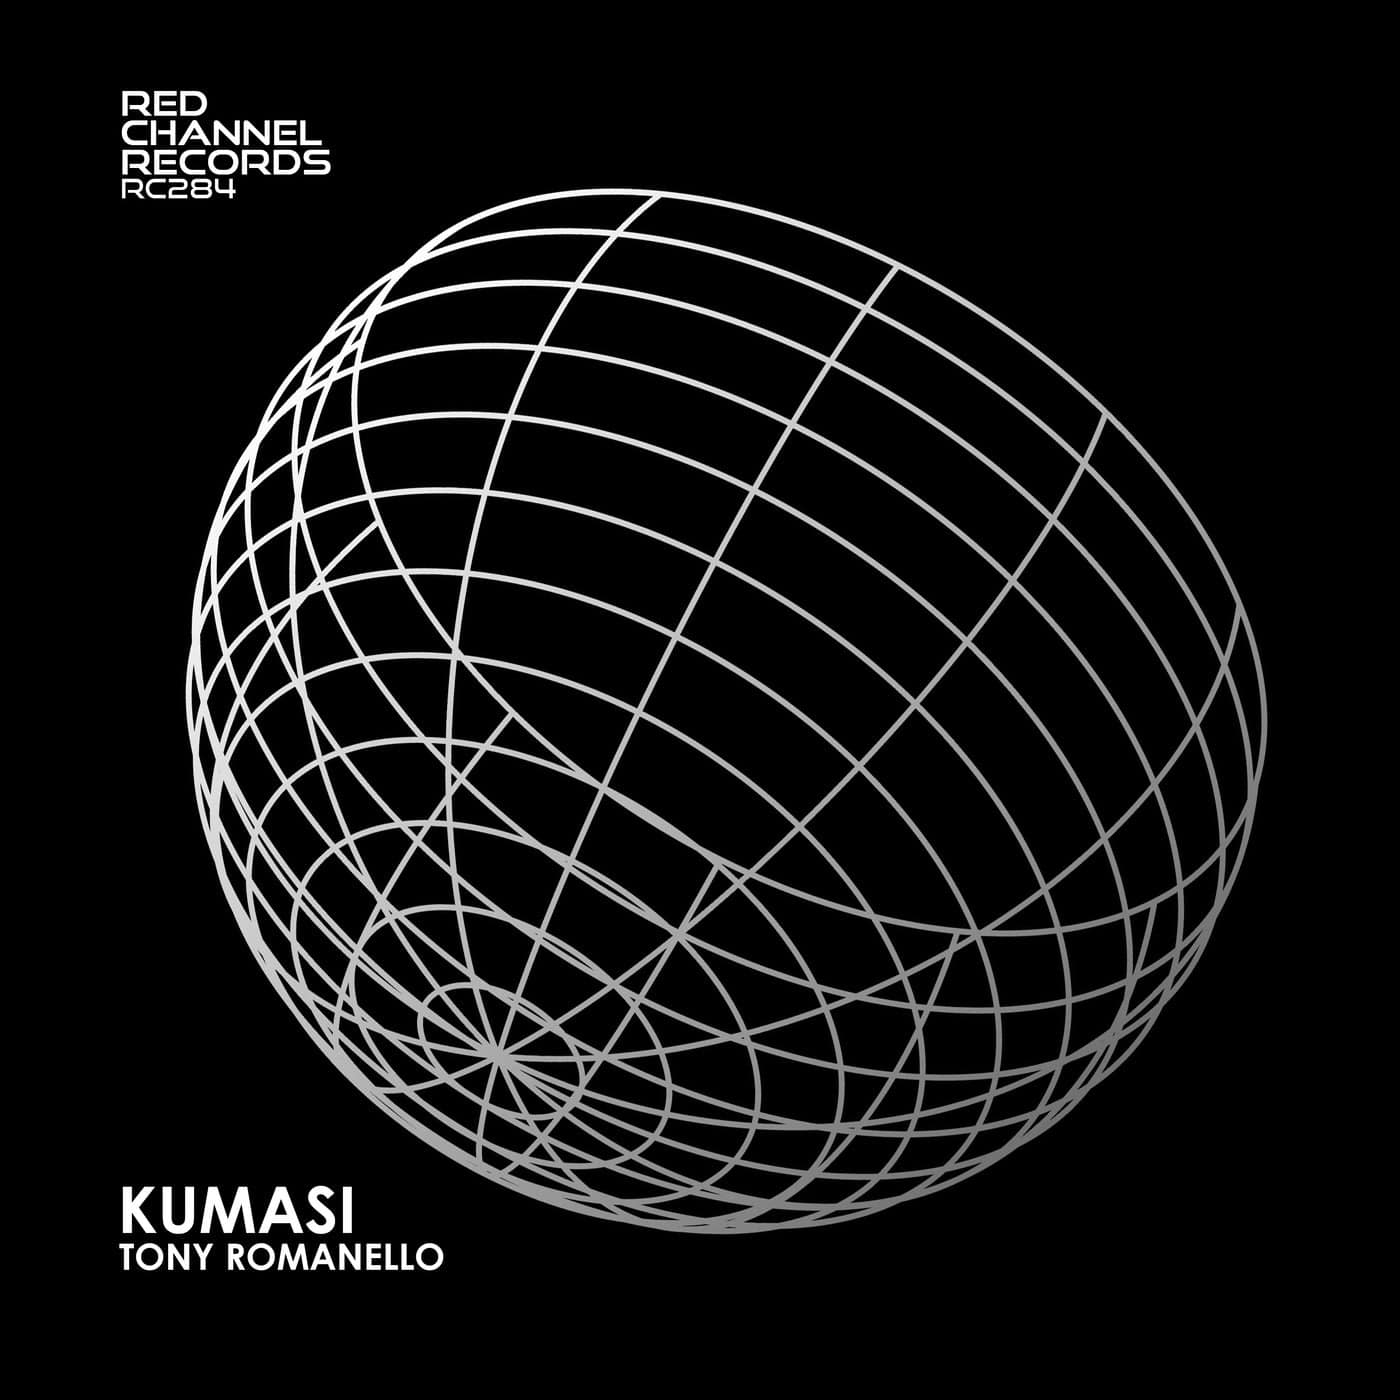 image cover: Tony Romanello - Kumasi on RED CHANNEL RECORDS